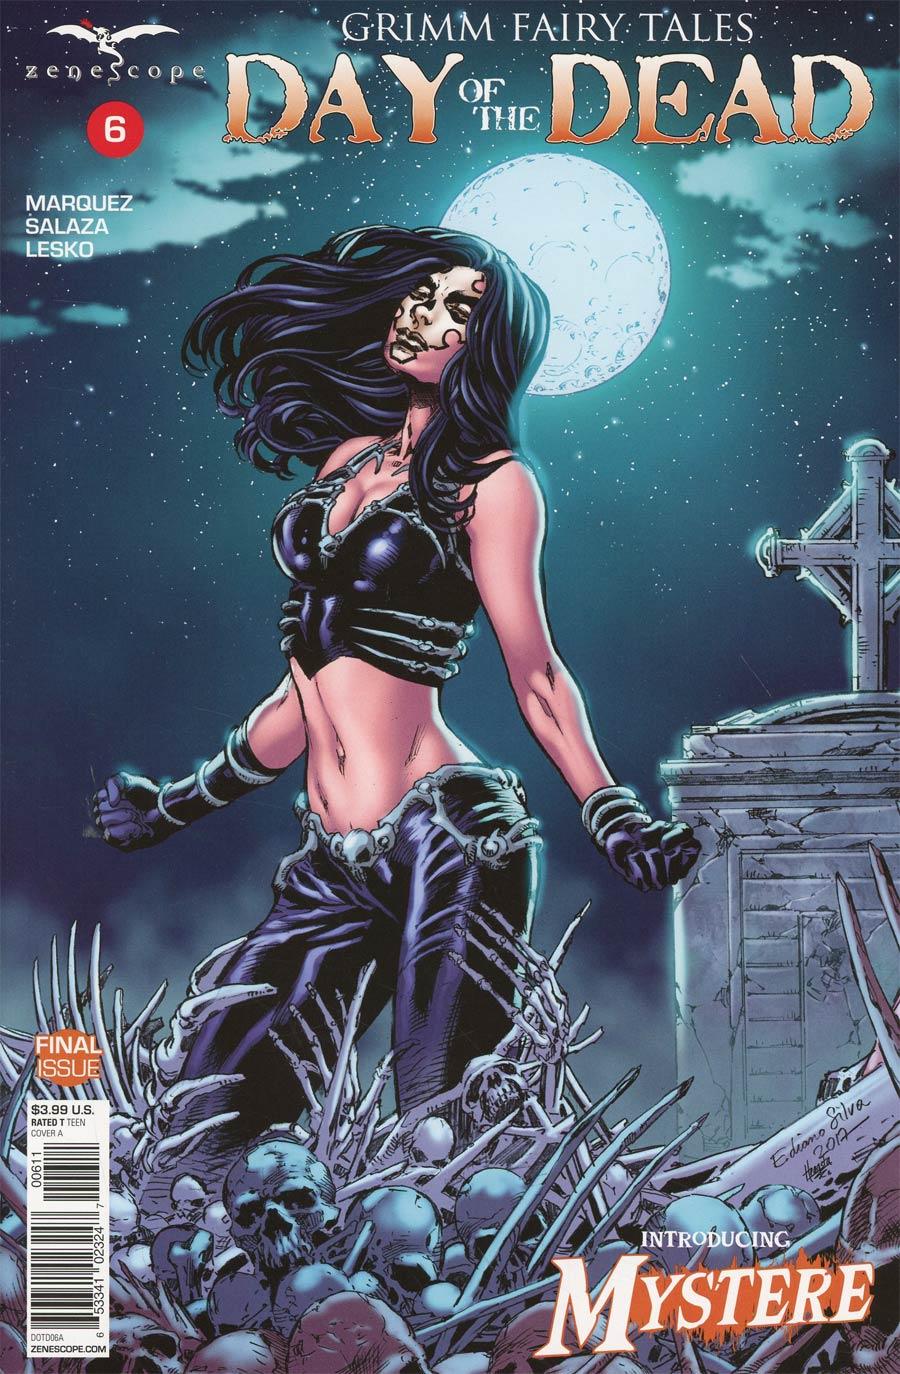 Grimm Fairy Tales Presents Day Of The Dead Vol. 1 #6